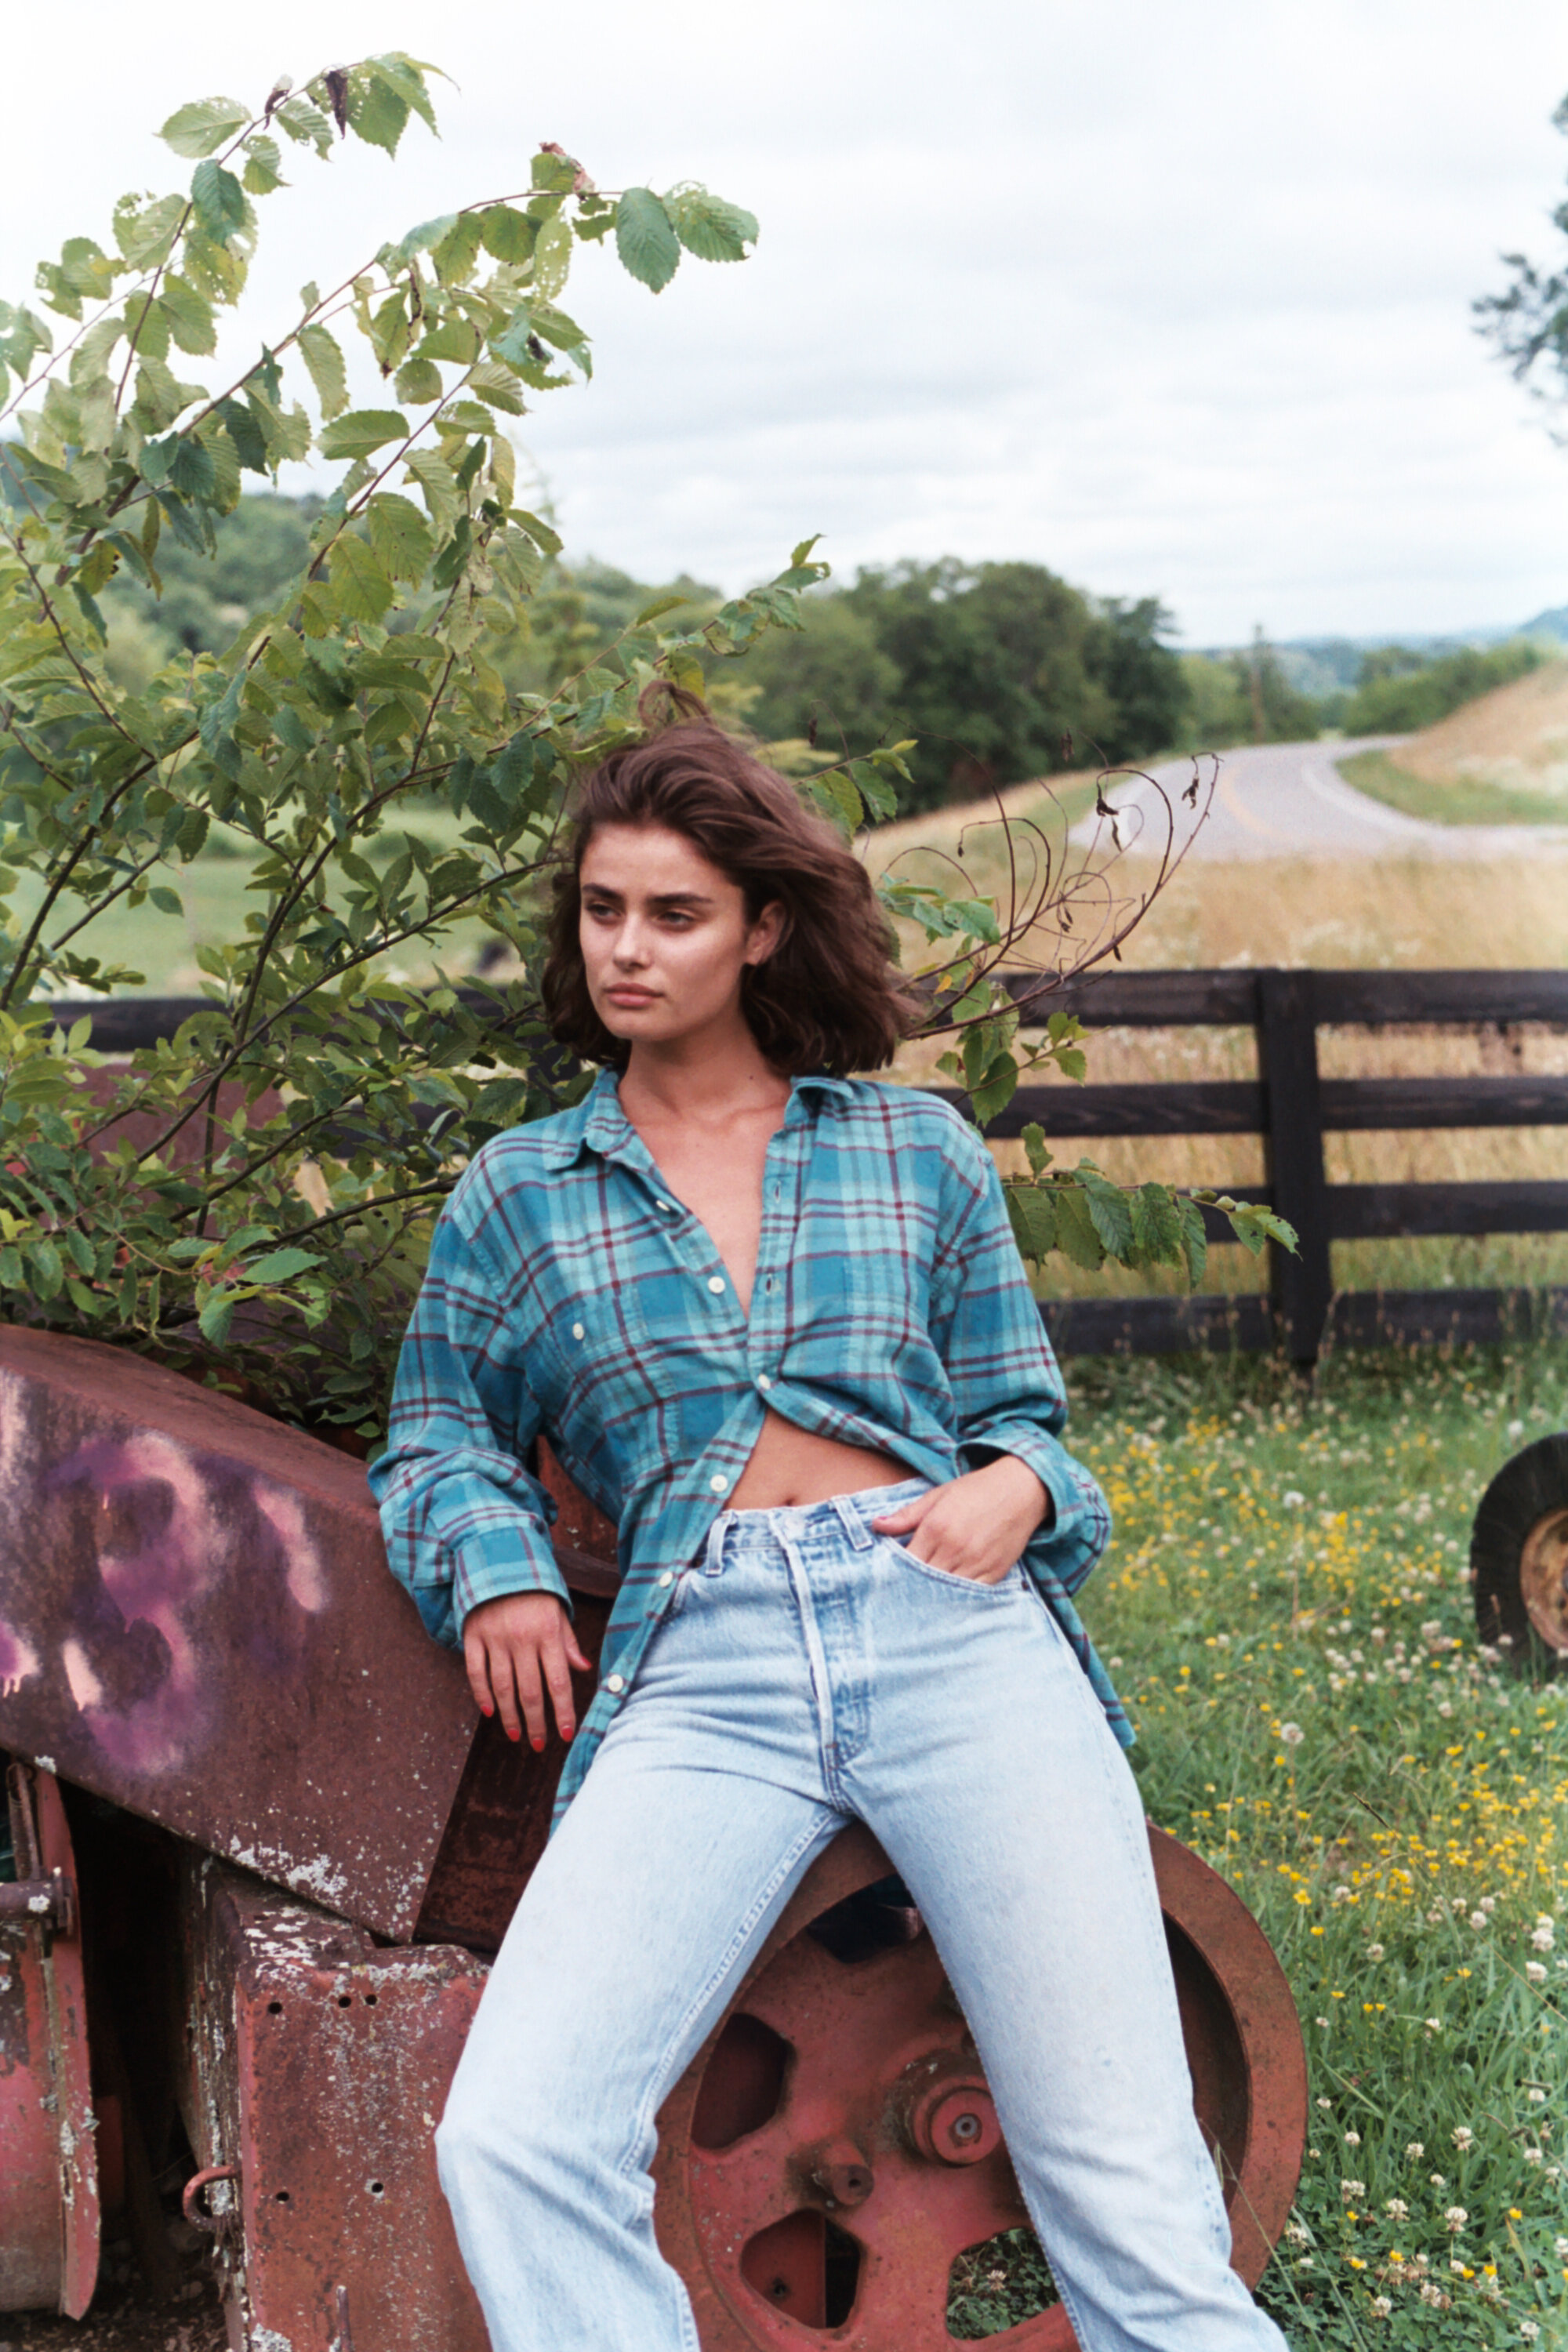 Photo n°10 : Taylor Hill la country girl!